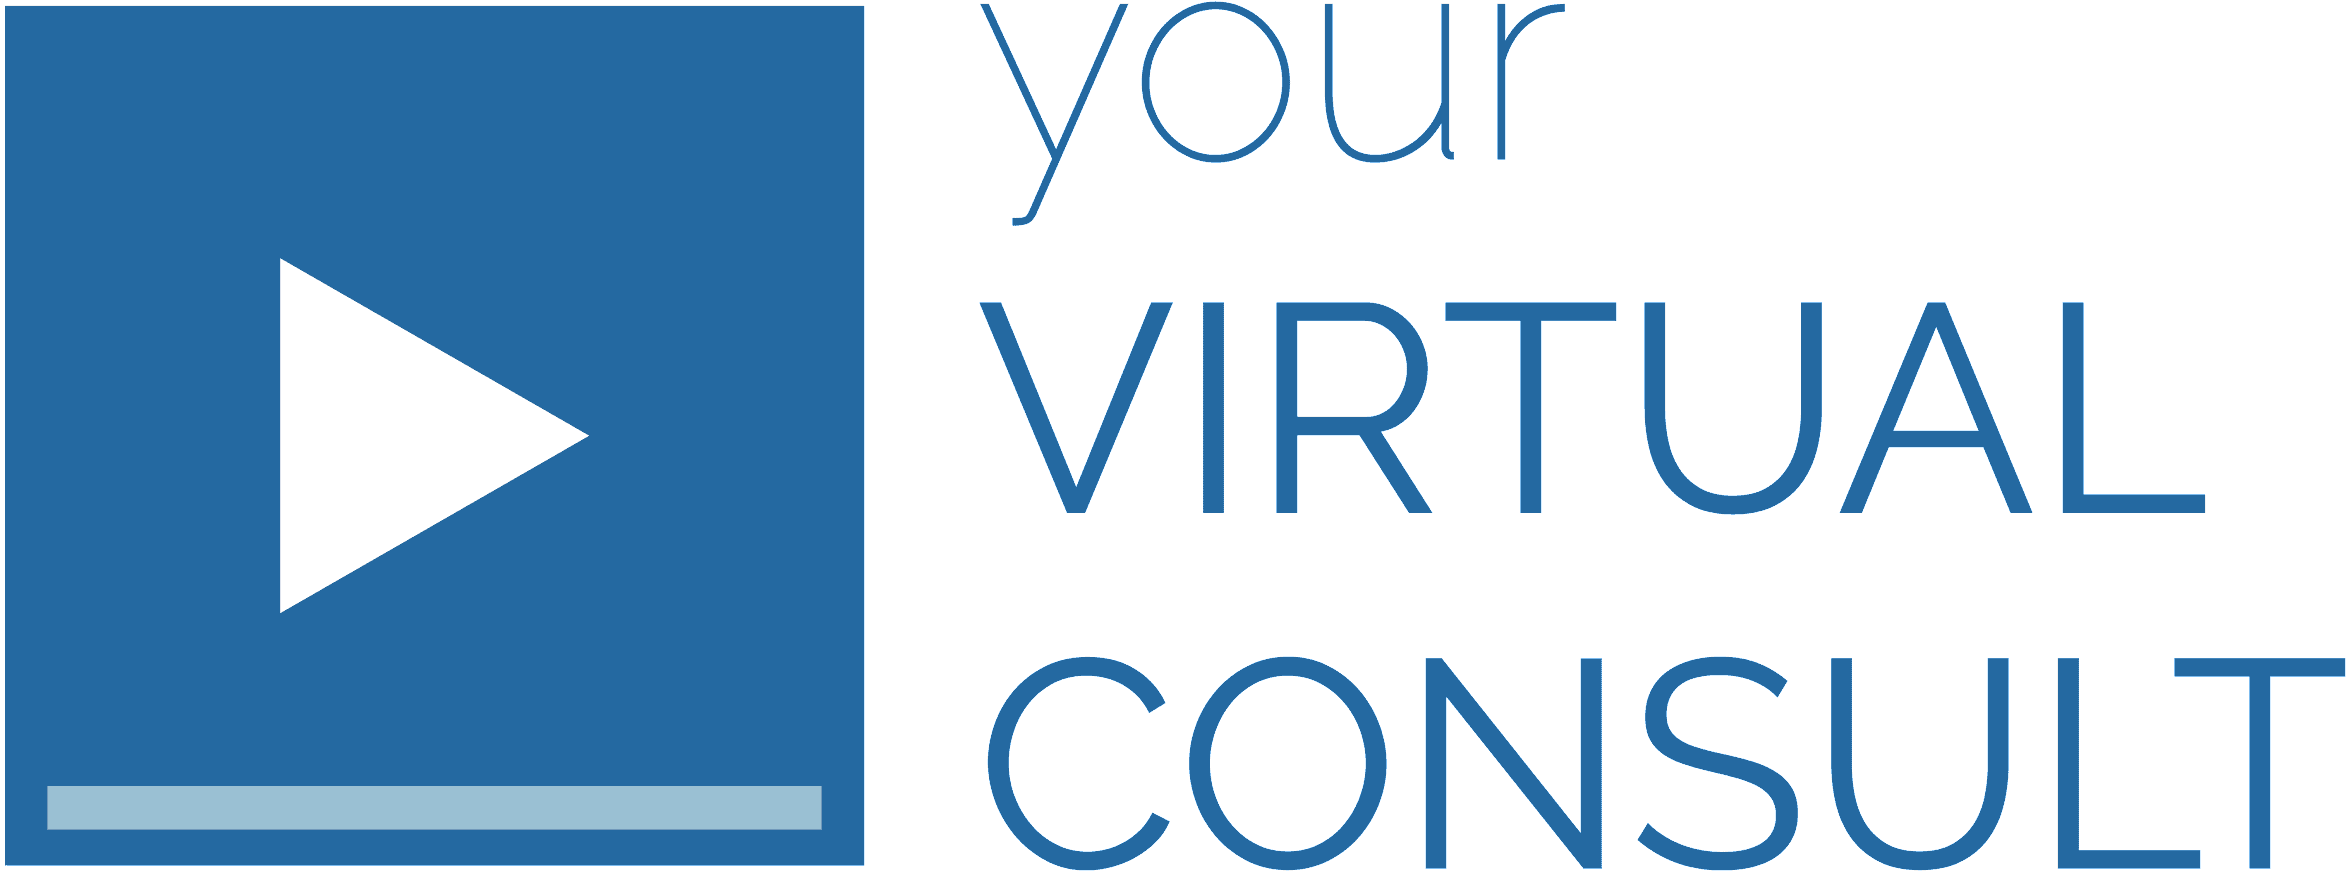 Your Virtual Consult